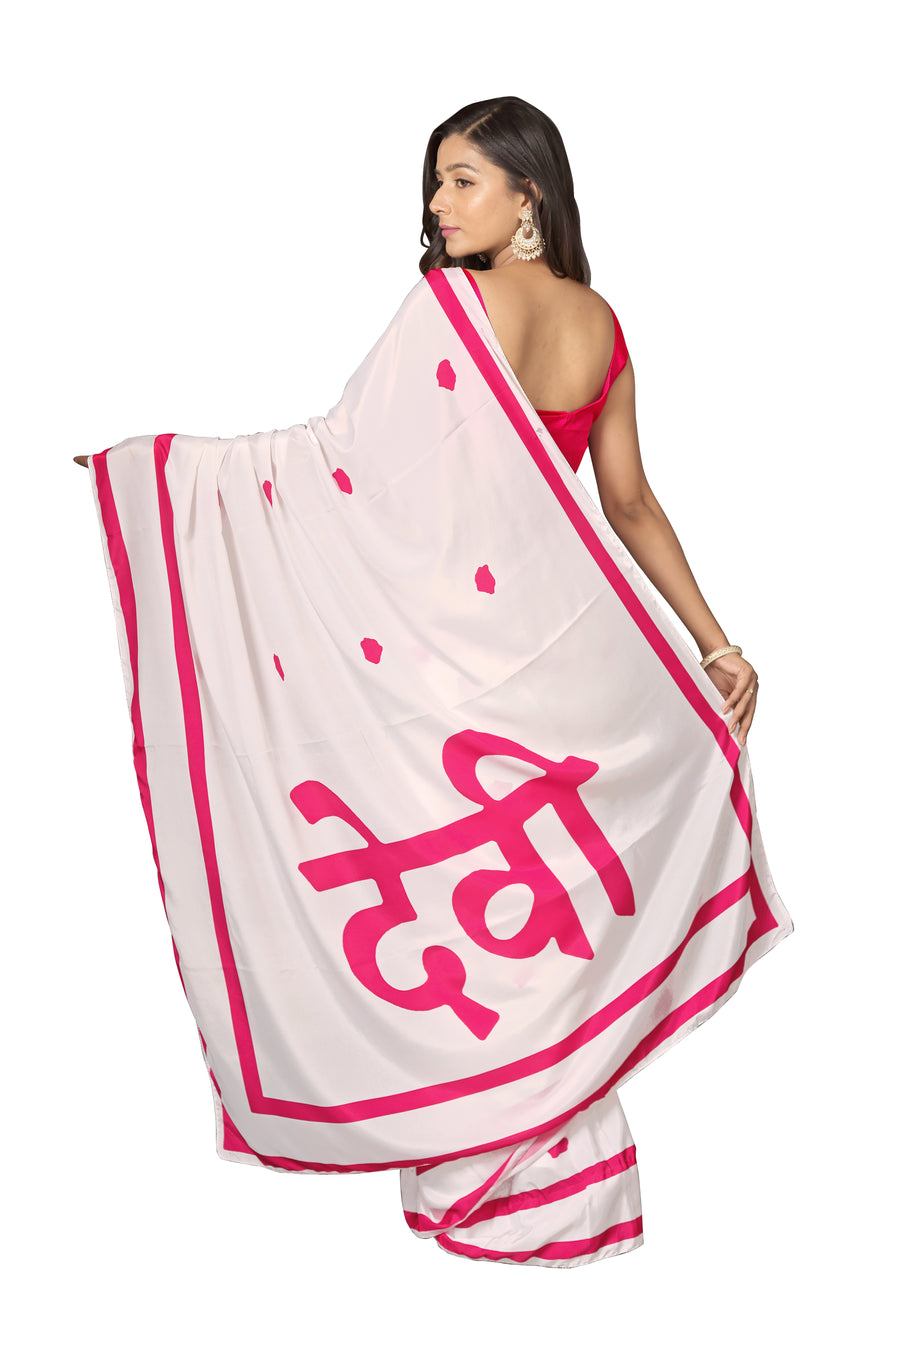 Devi Saree - The Strength within You